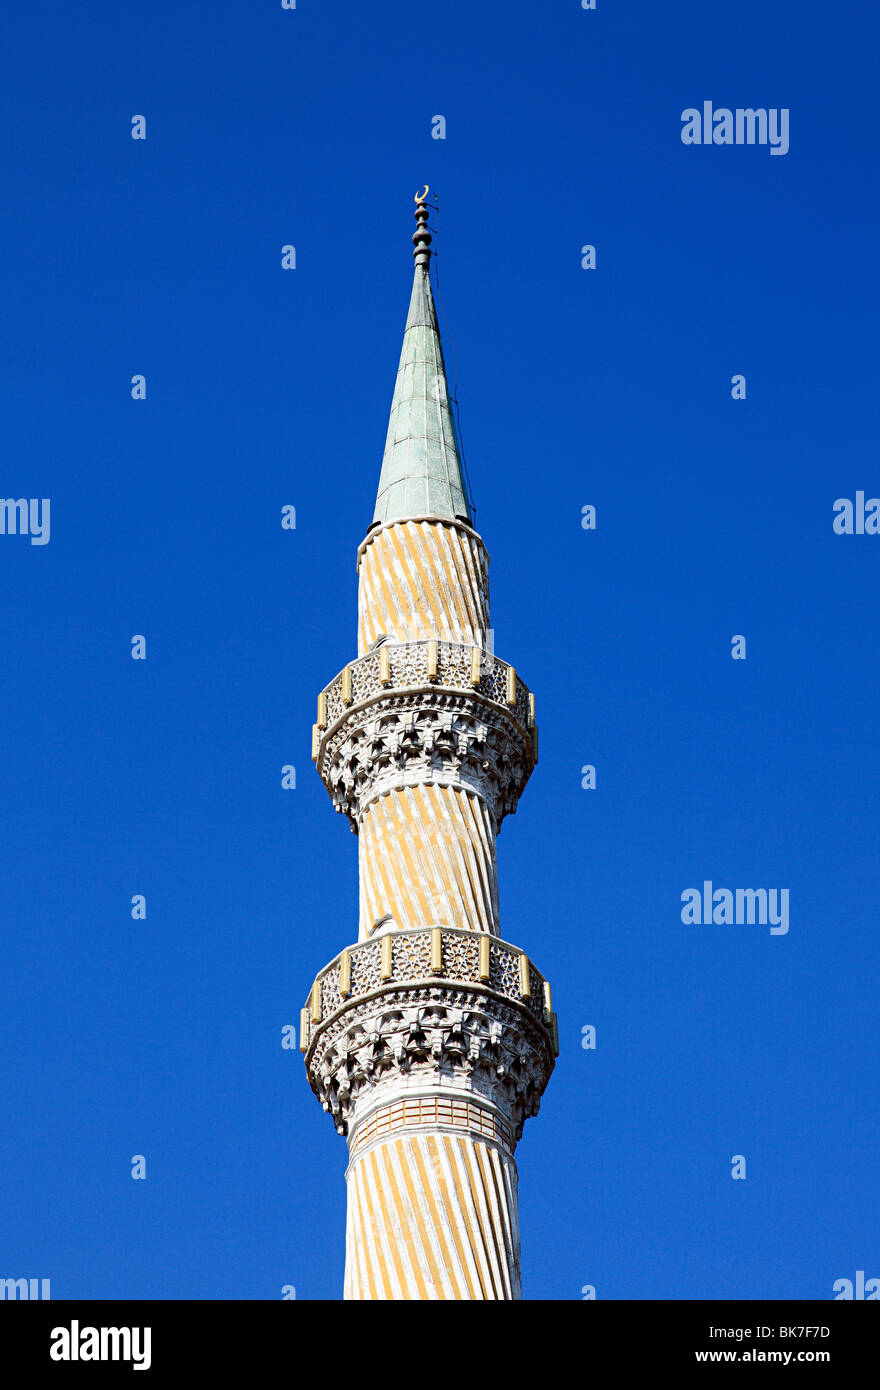 Sultan Ahmed istabul moschea Foto Stock